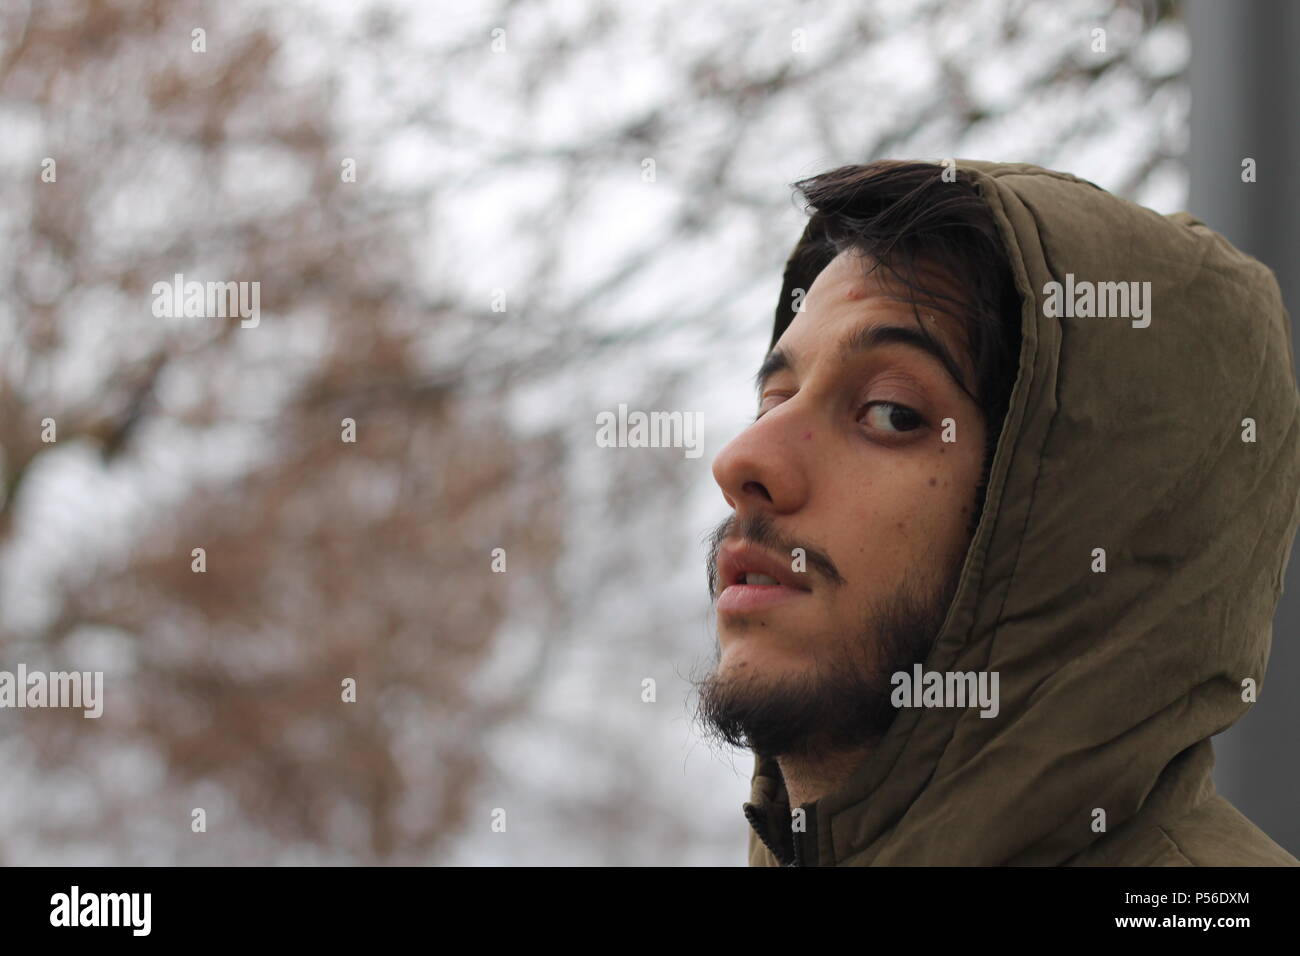 Young men thinking with his hand on chin. Looking upset or sad. Stock Photo